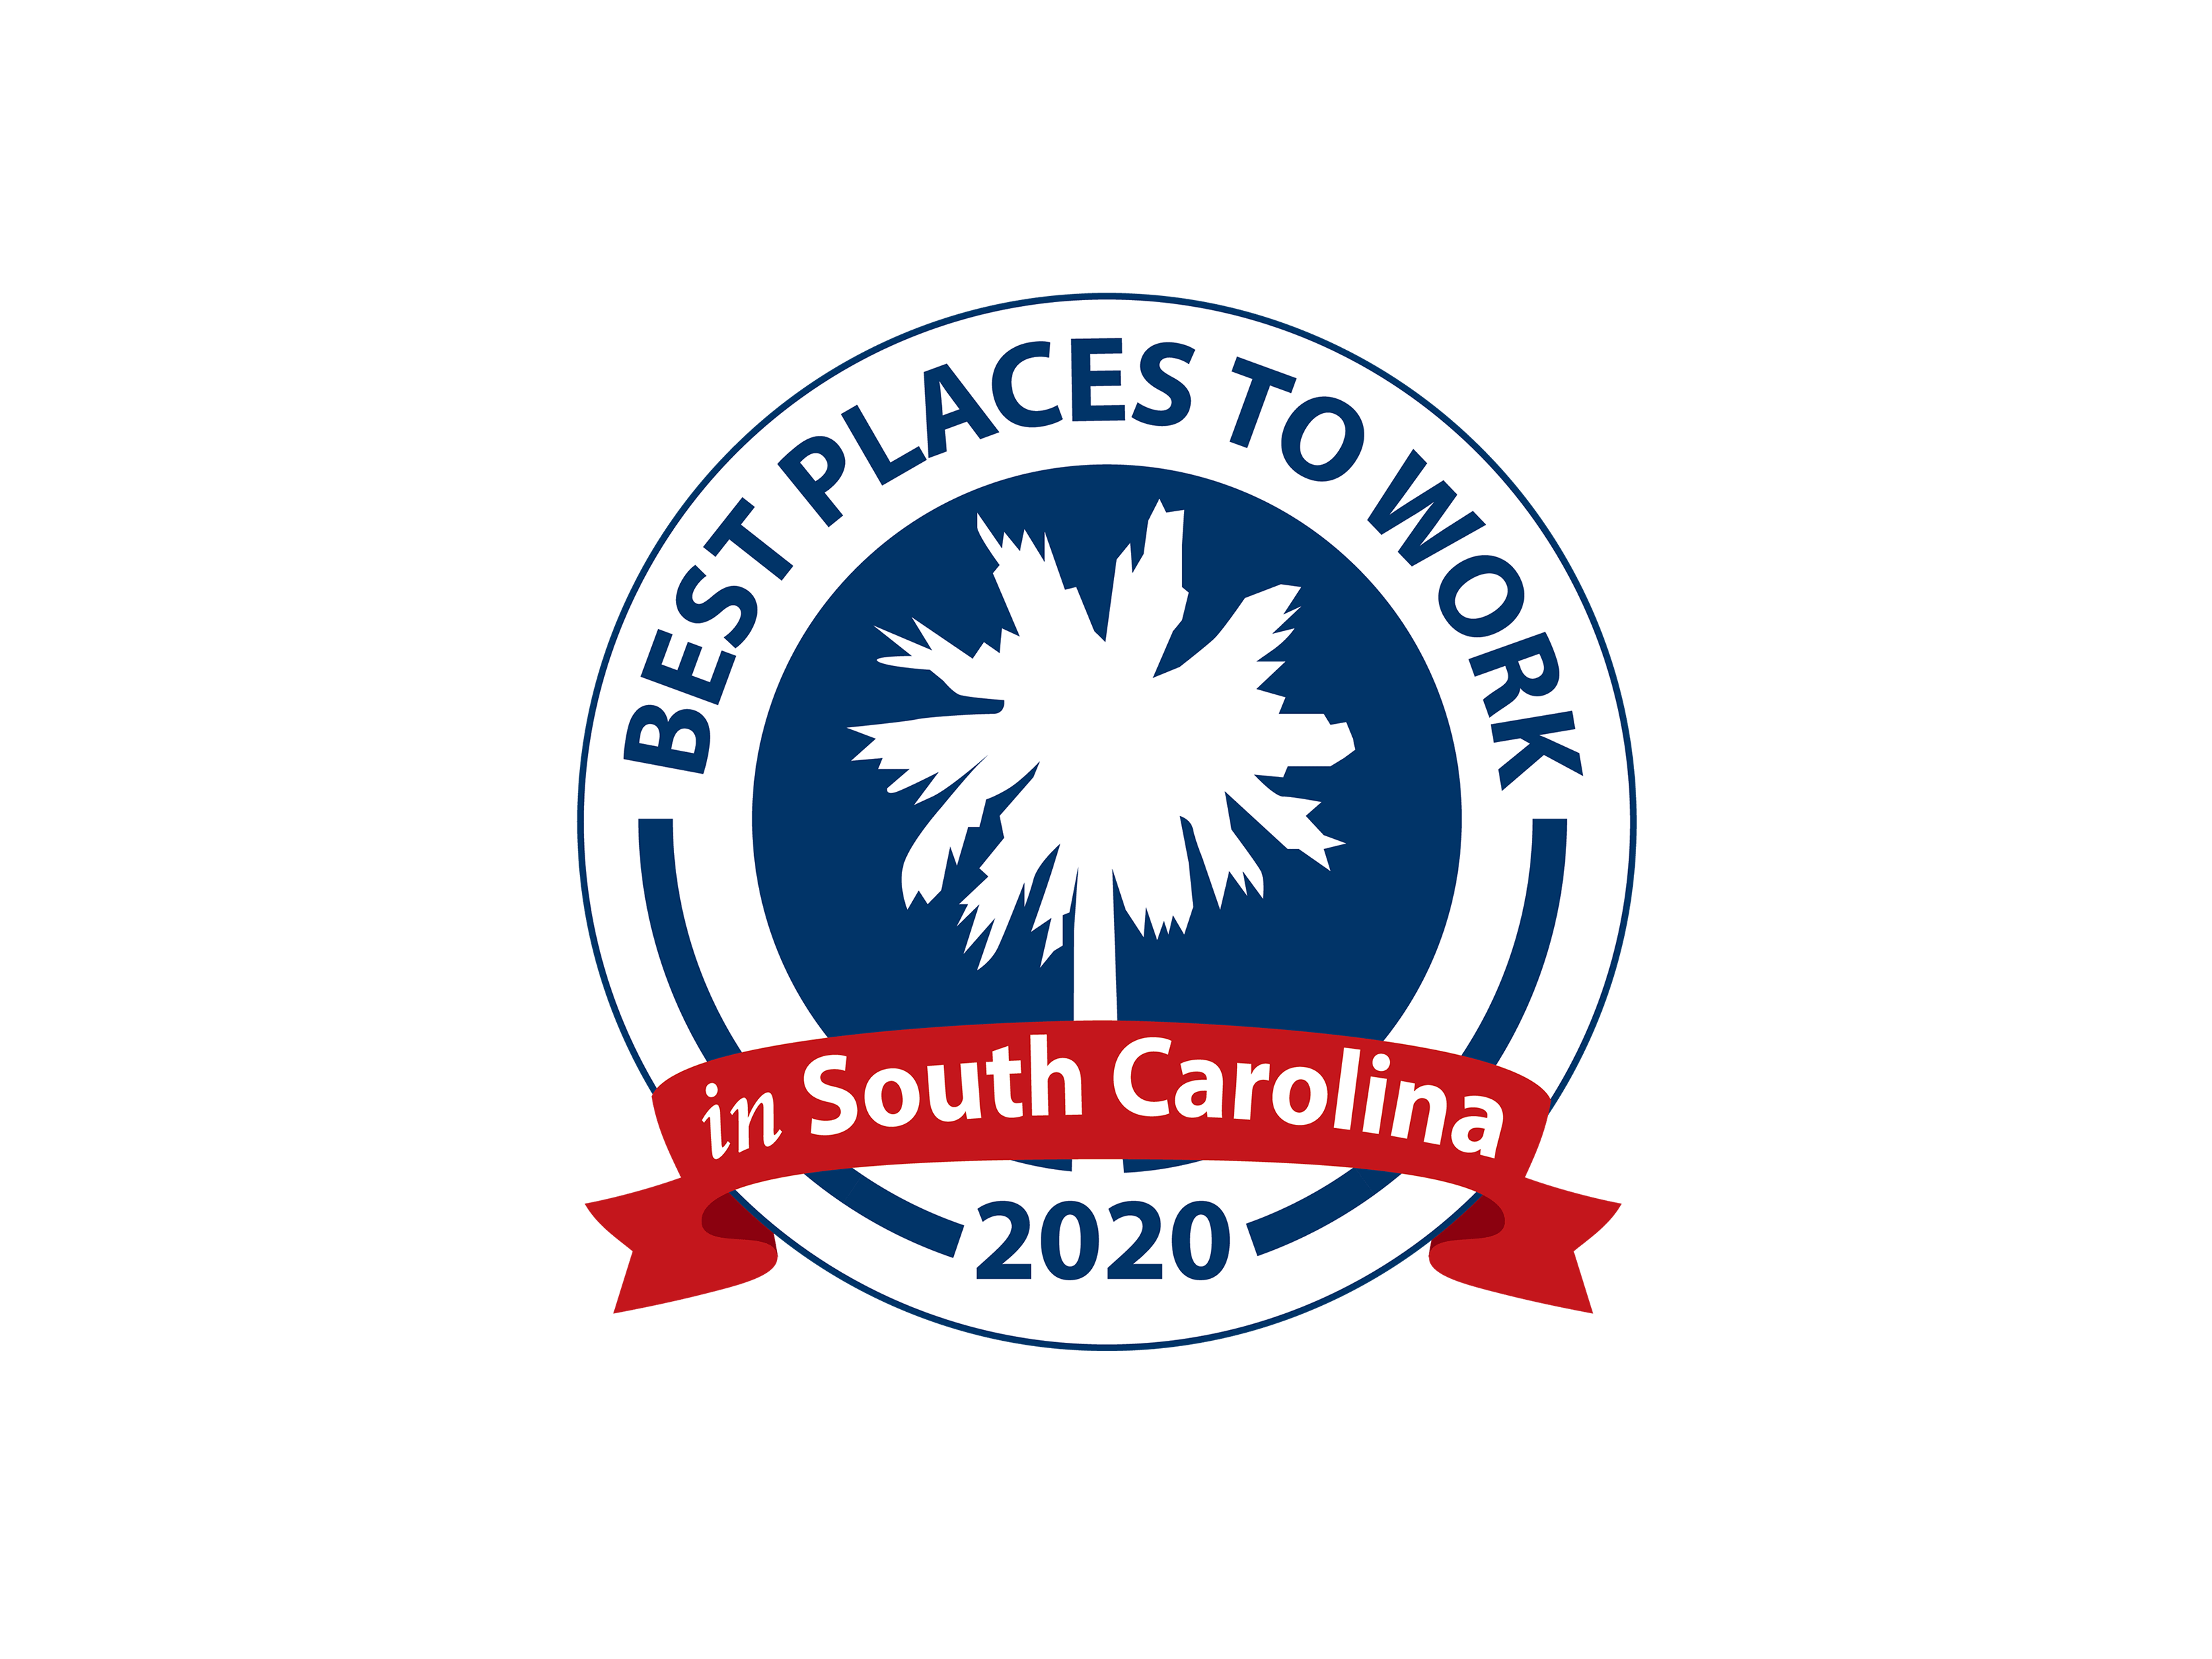 Best place to work in South Carolina Award Icon